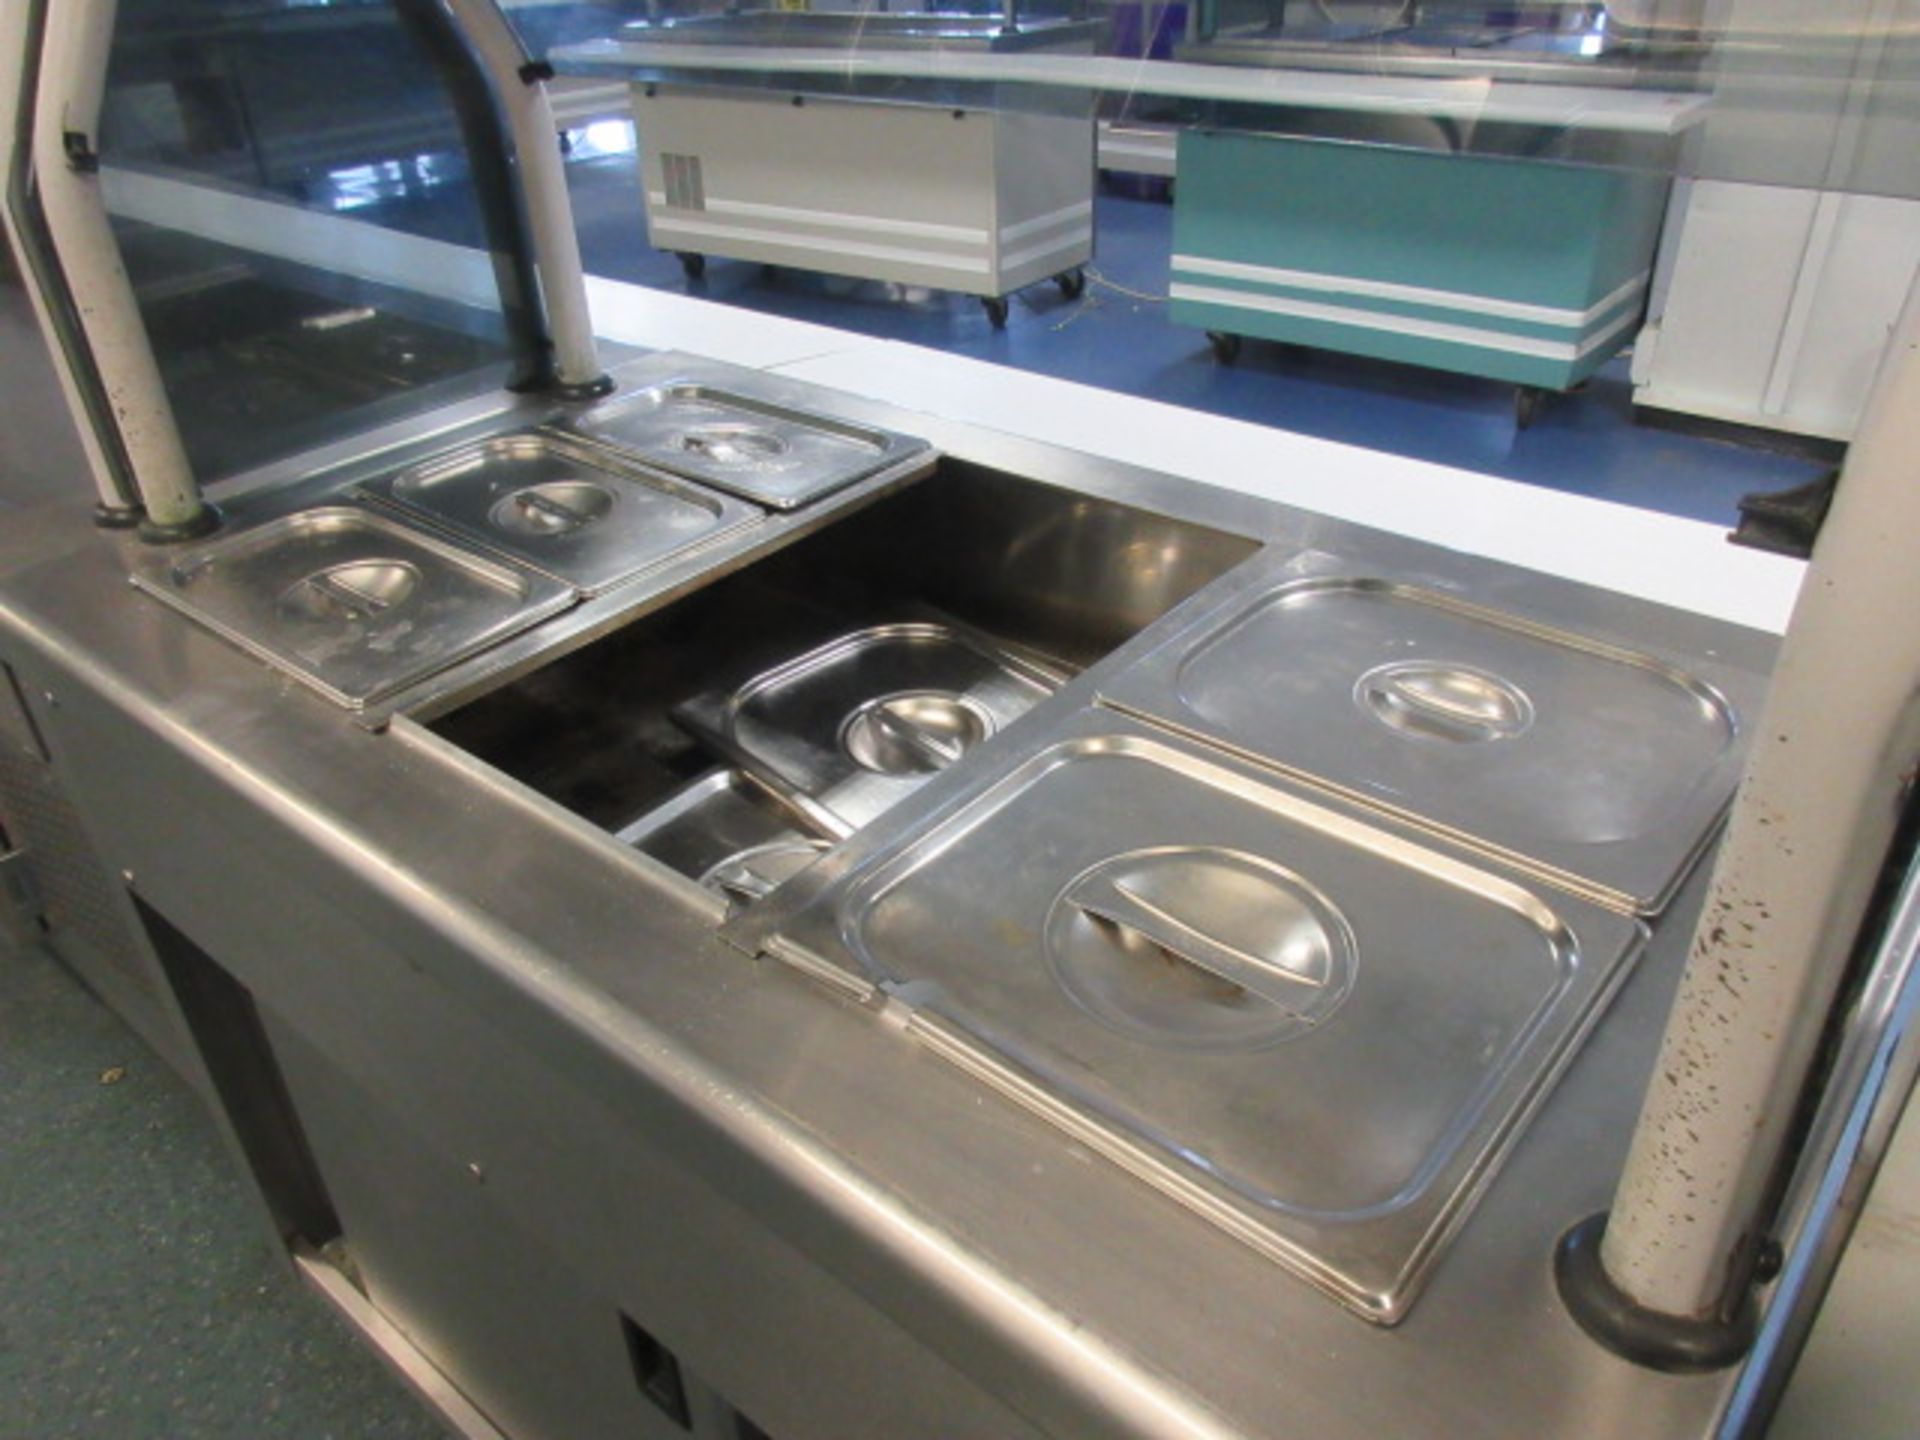 VICTOR 7 UNIT BAIN MARIE WITH TRAY SHELF. FOUR STORAGE UNITS, REFRIGERATED UNIT, HEATED 7 POT - Image 4 of 6